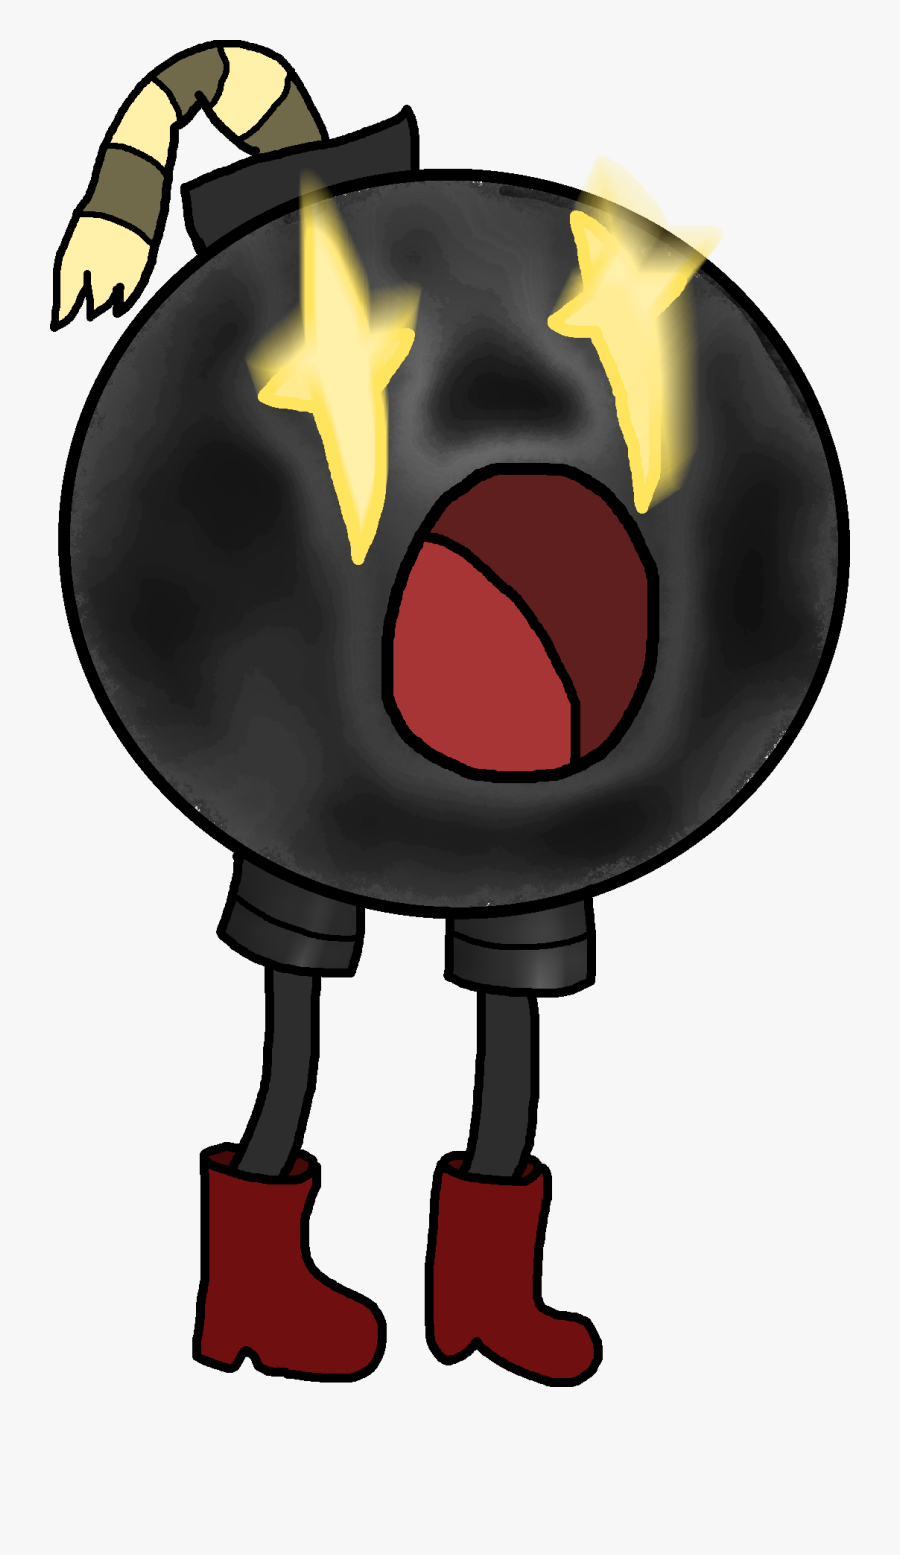 Paradigm Bomb With Legs - Bomb With Legs, Transparent Clipart